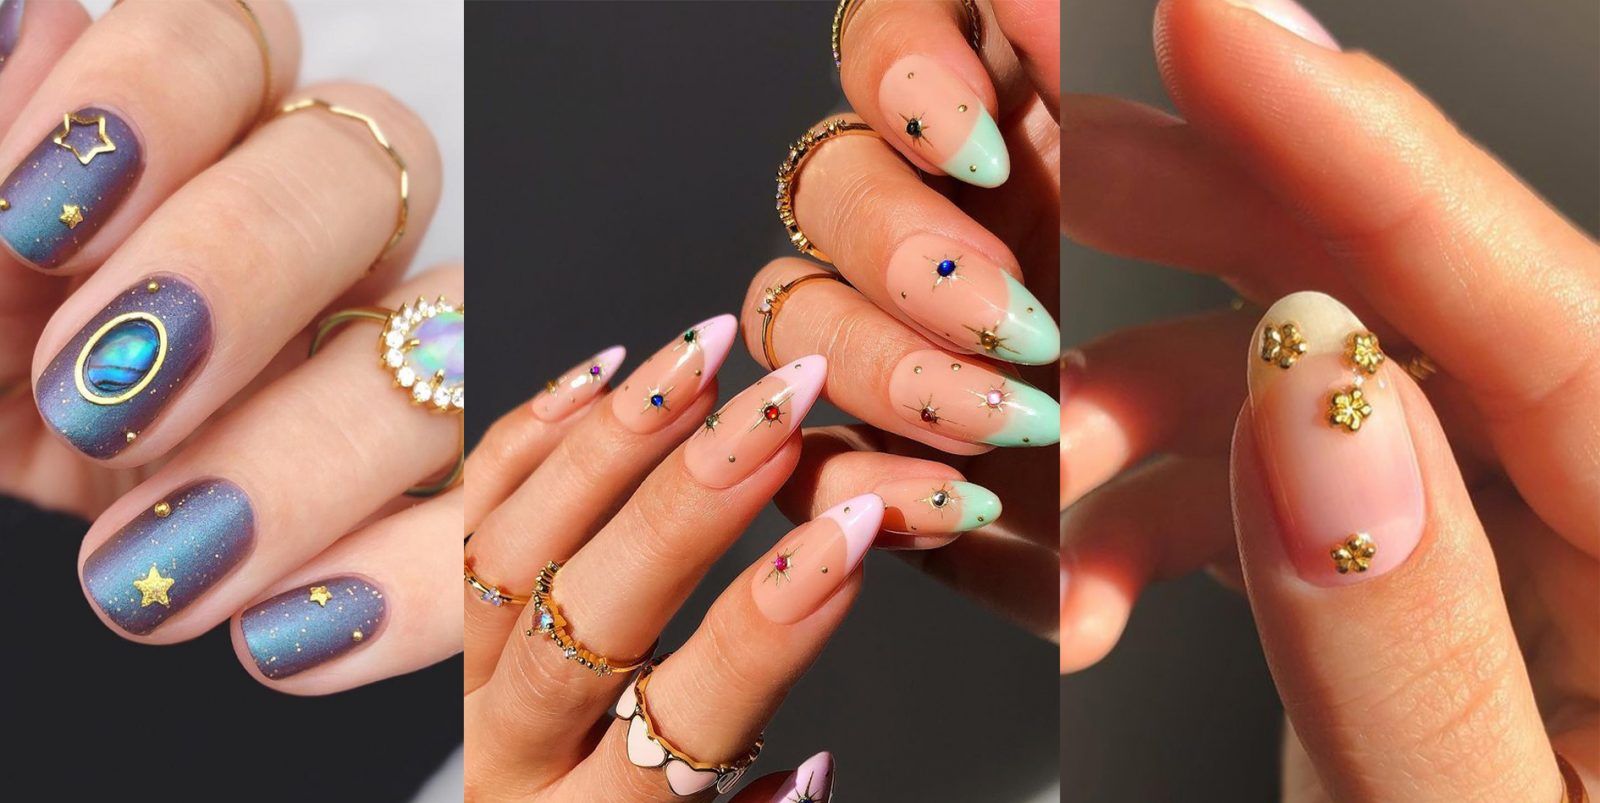 3D Nail art to bookmark for your next manicure appointment